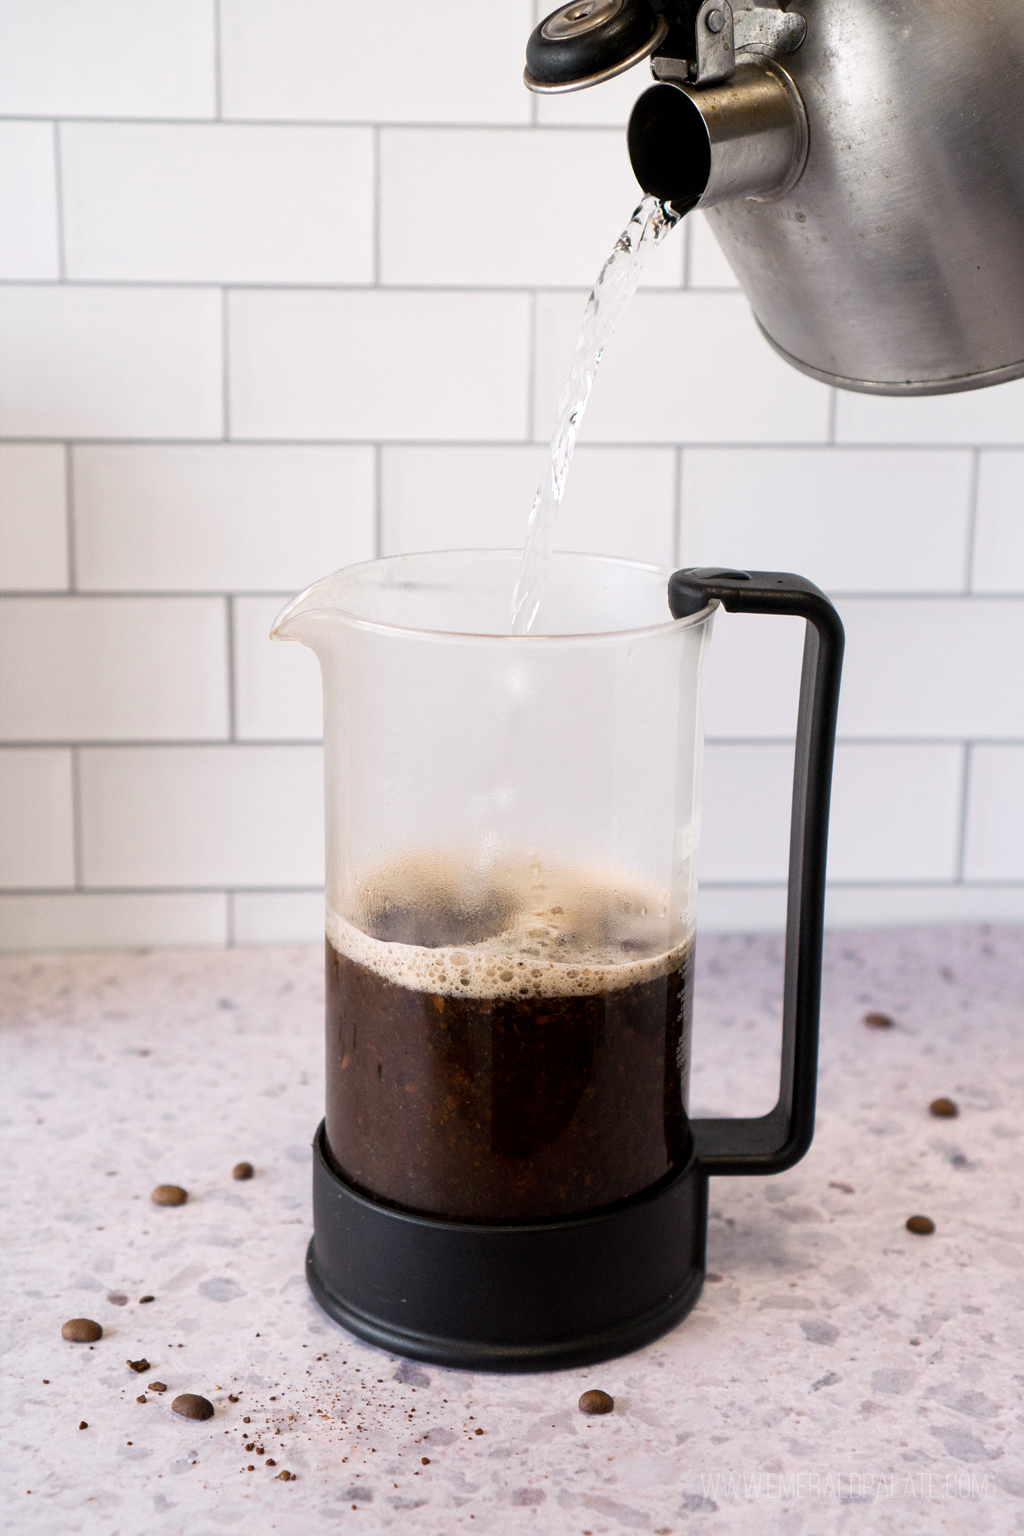 https://www.emeraldpalate.com/wp-content/uploads/2021/04/Best-Coffee-for-French-Press-pouring-water-lowres2.jpg